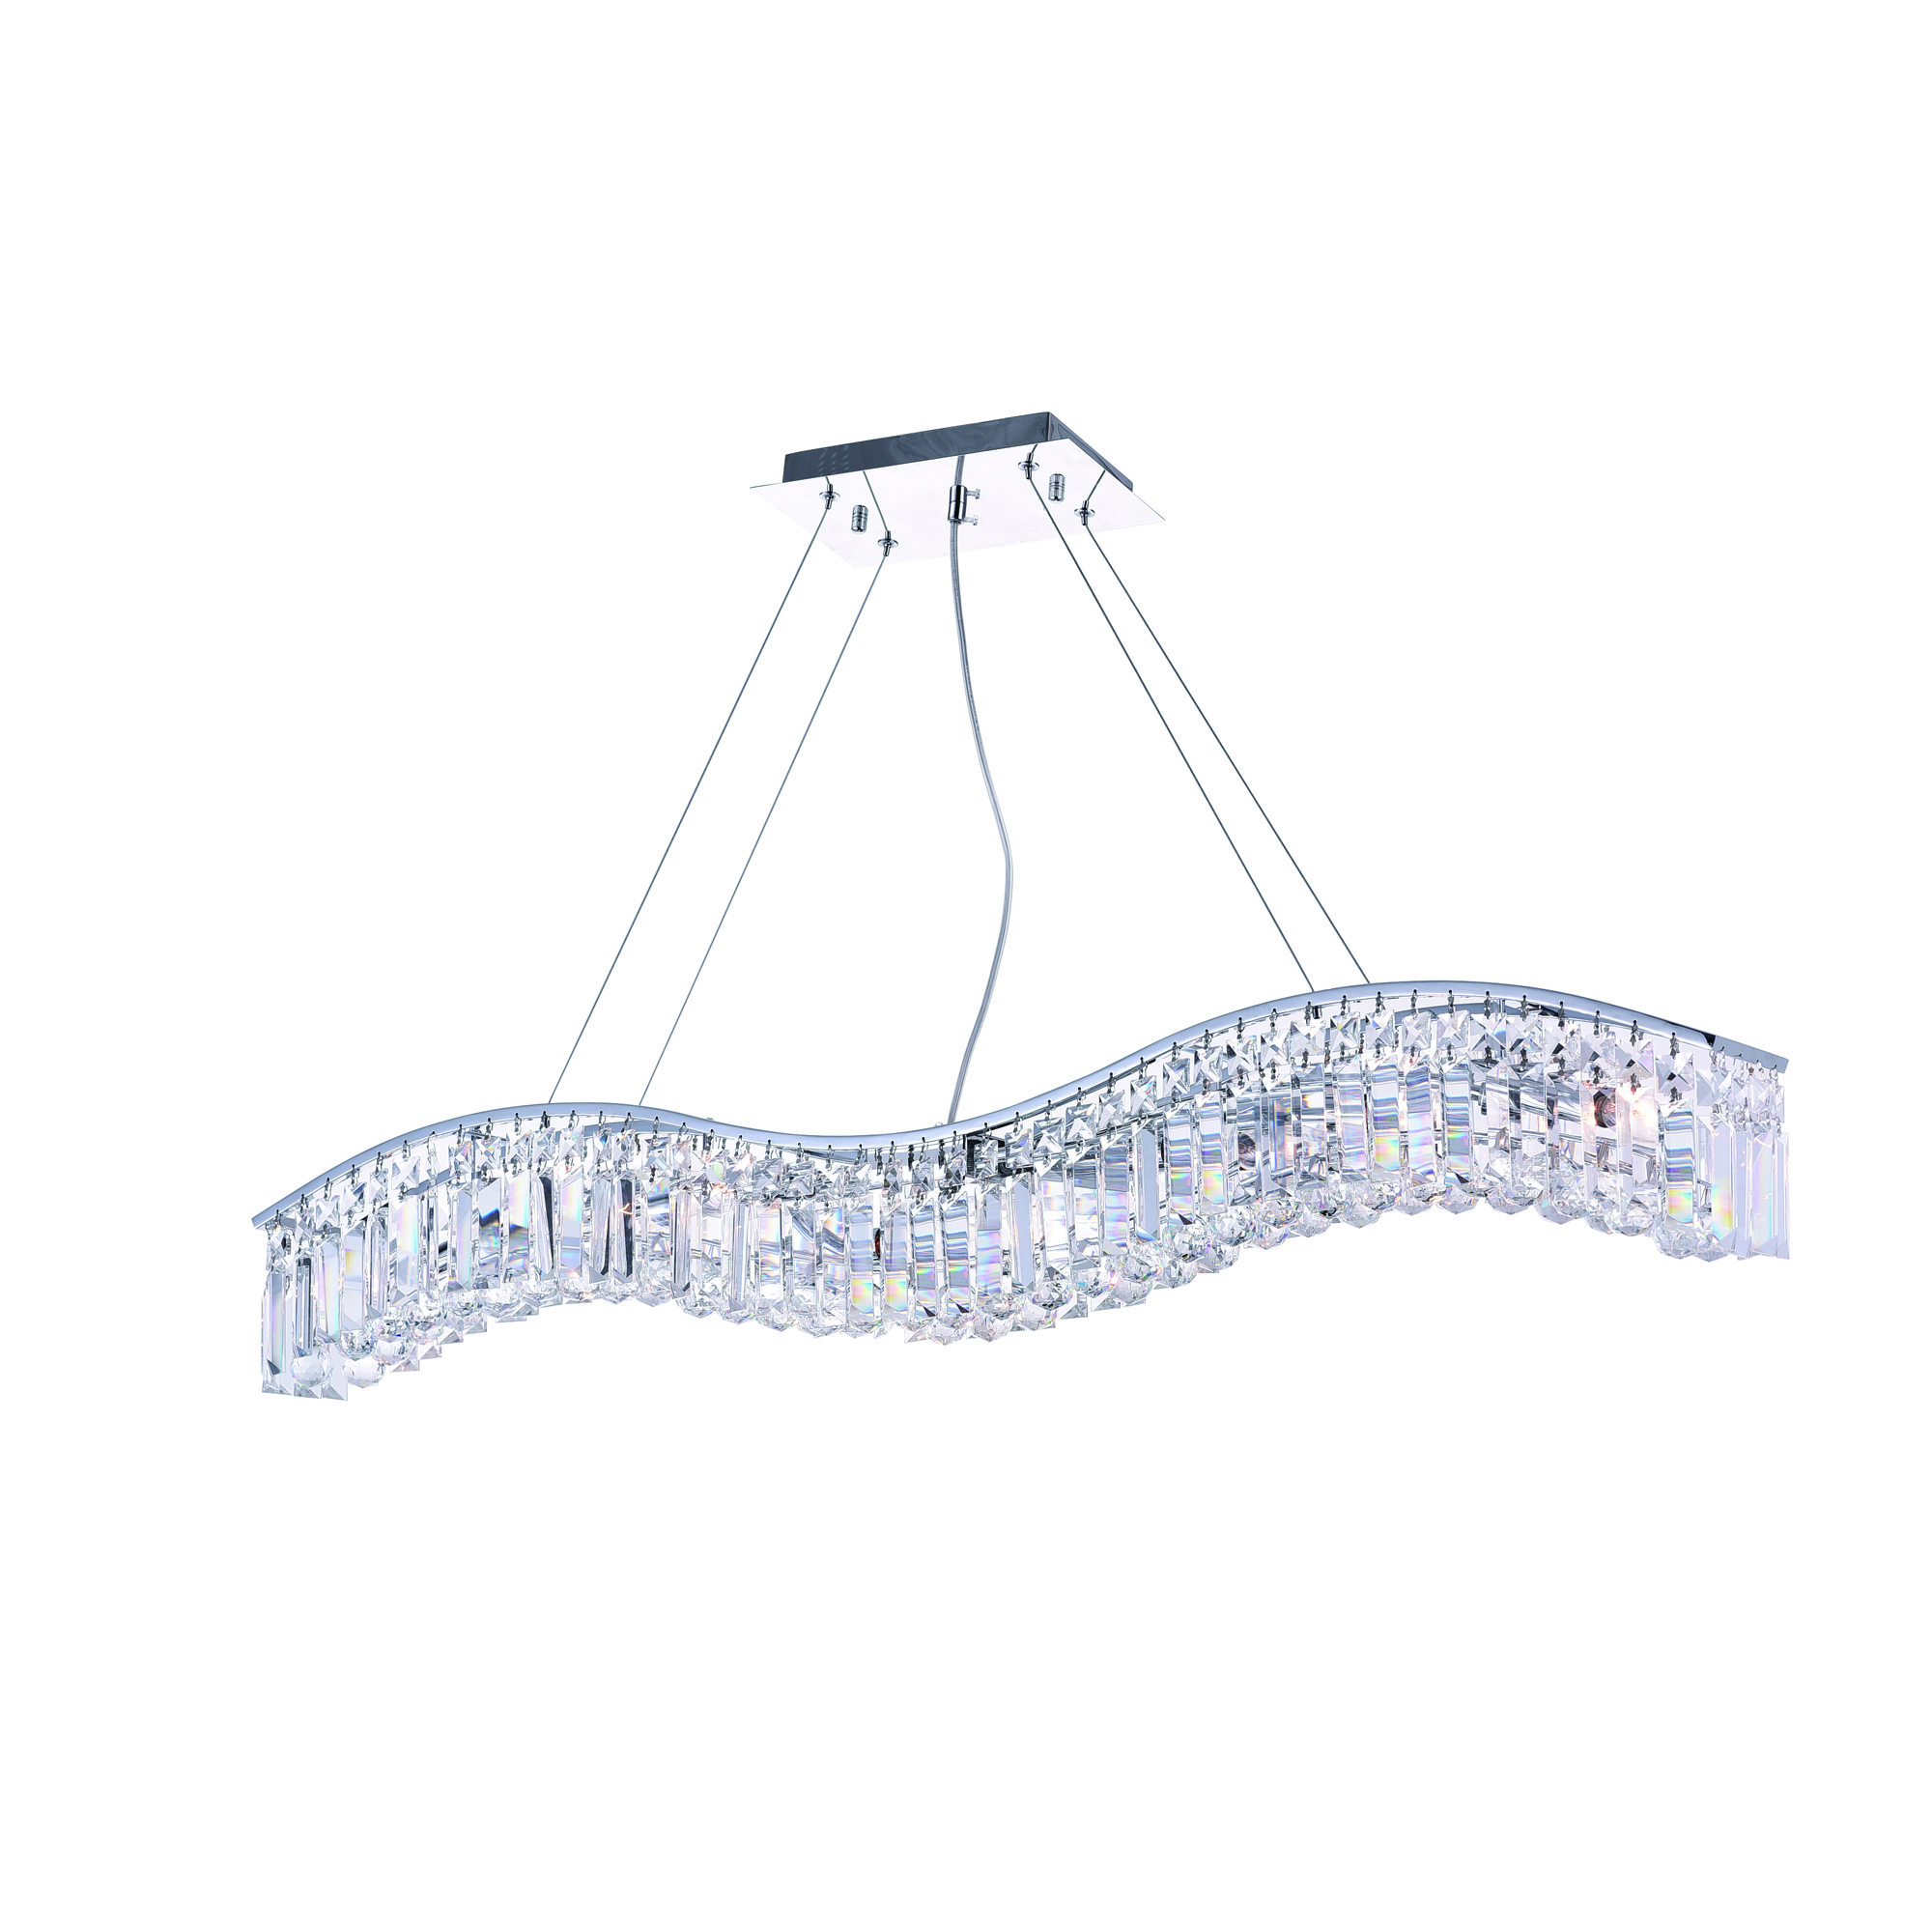 Glamorous 7 Light Down Chandelier With Chrome Finish